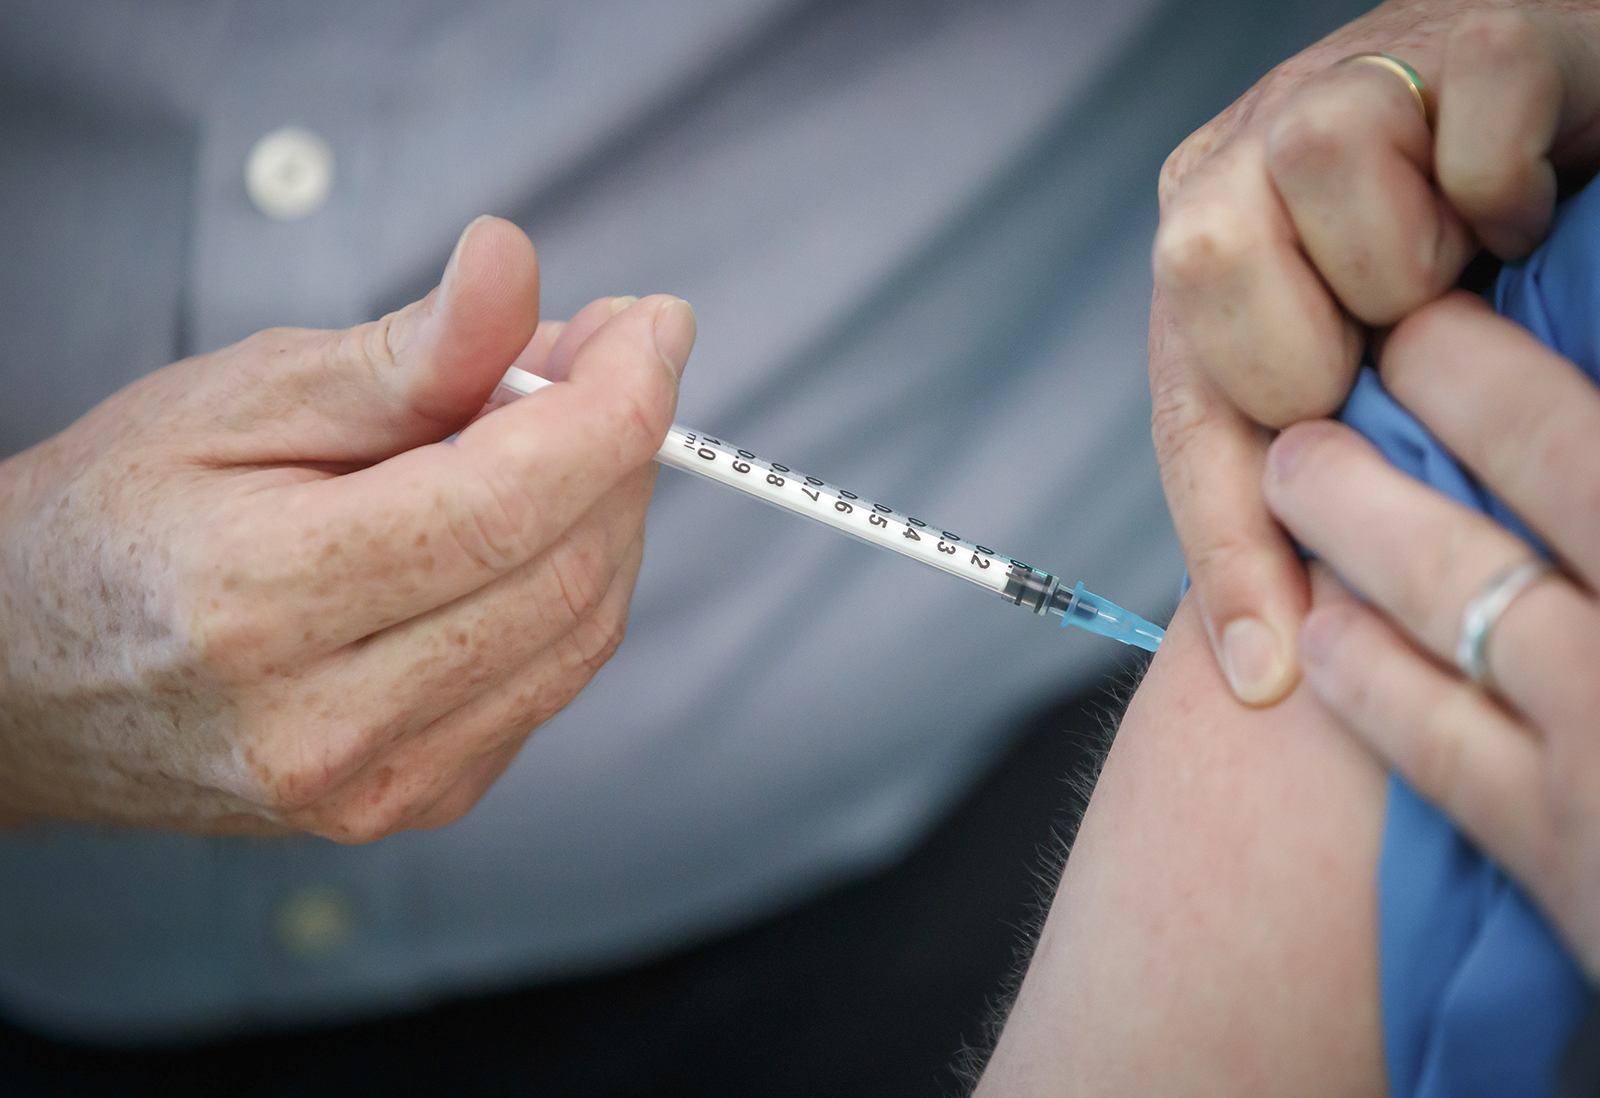 A person receives the Pfizer-BioNTech vaccine at a vaccination center in York, England on December 21, 2020.